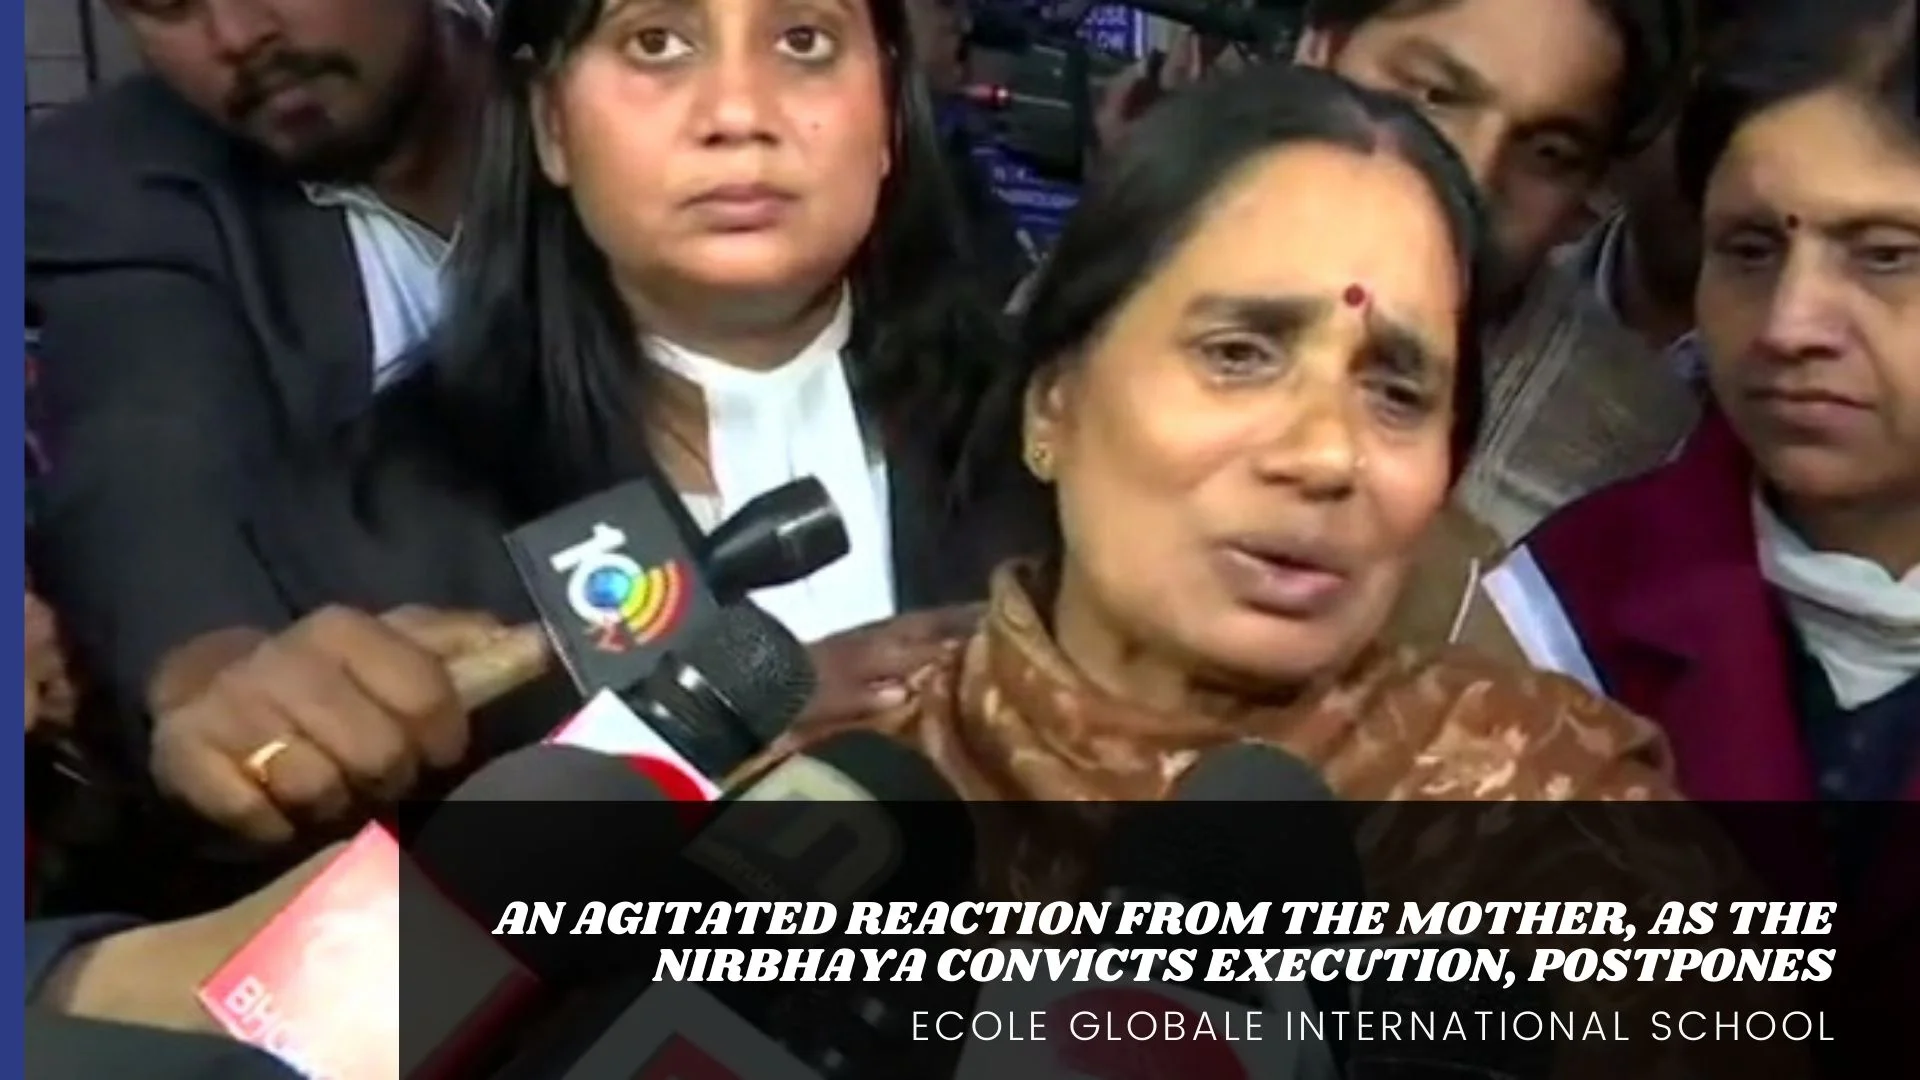 You are currently viewing AN AGITATED REACTION FROM THE MOTHER, AS THE NIRBHAYA CONVICTS EXECUTION, POSTPONES